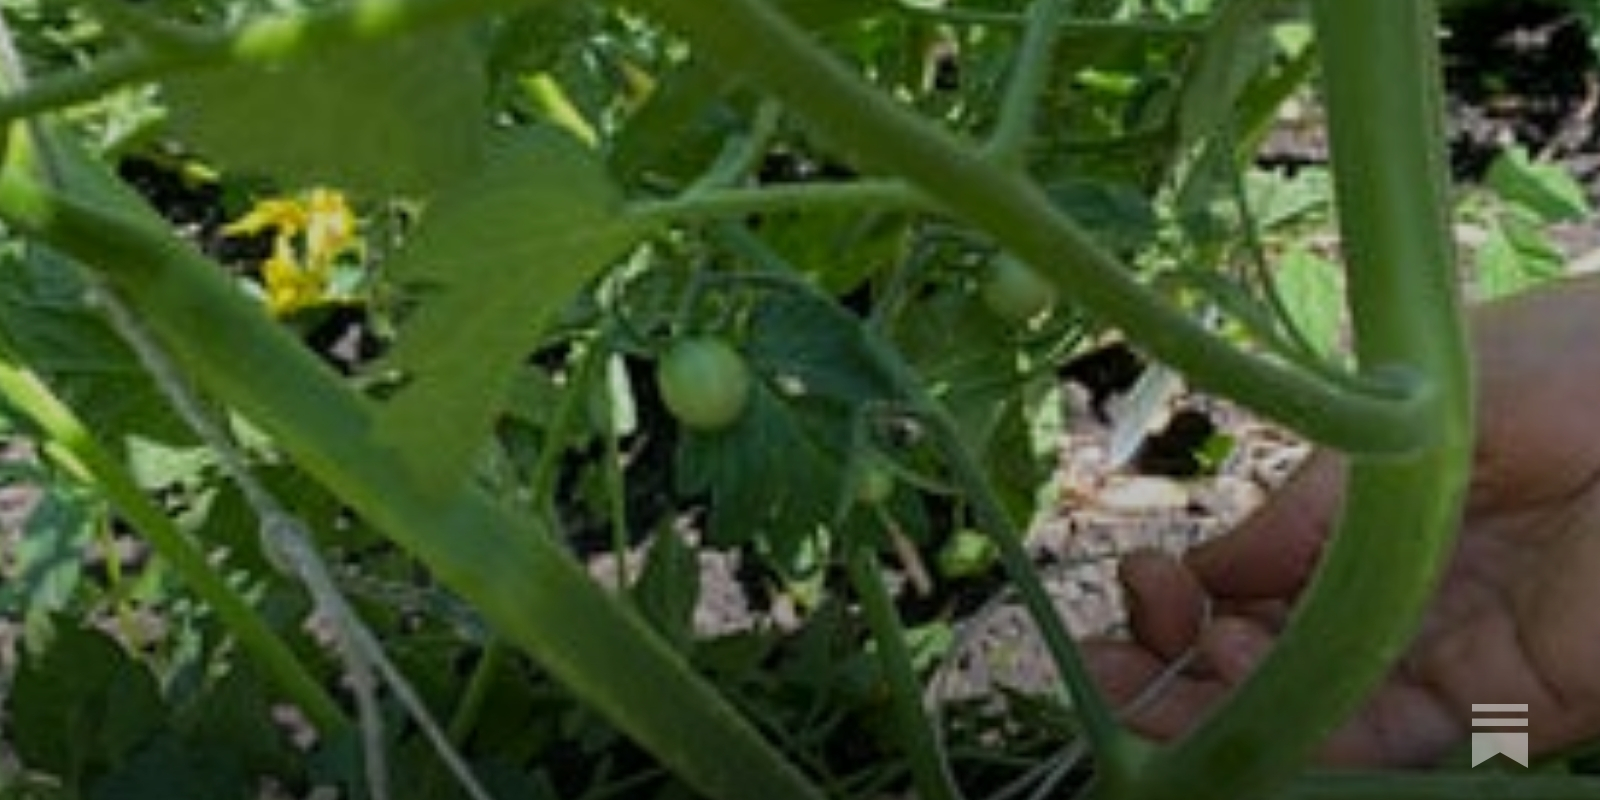 Pruning Tomato Plants - by Amy Pennington